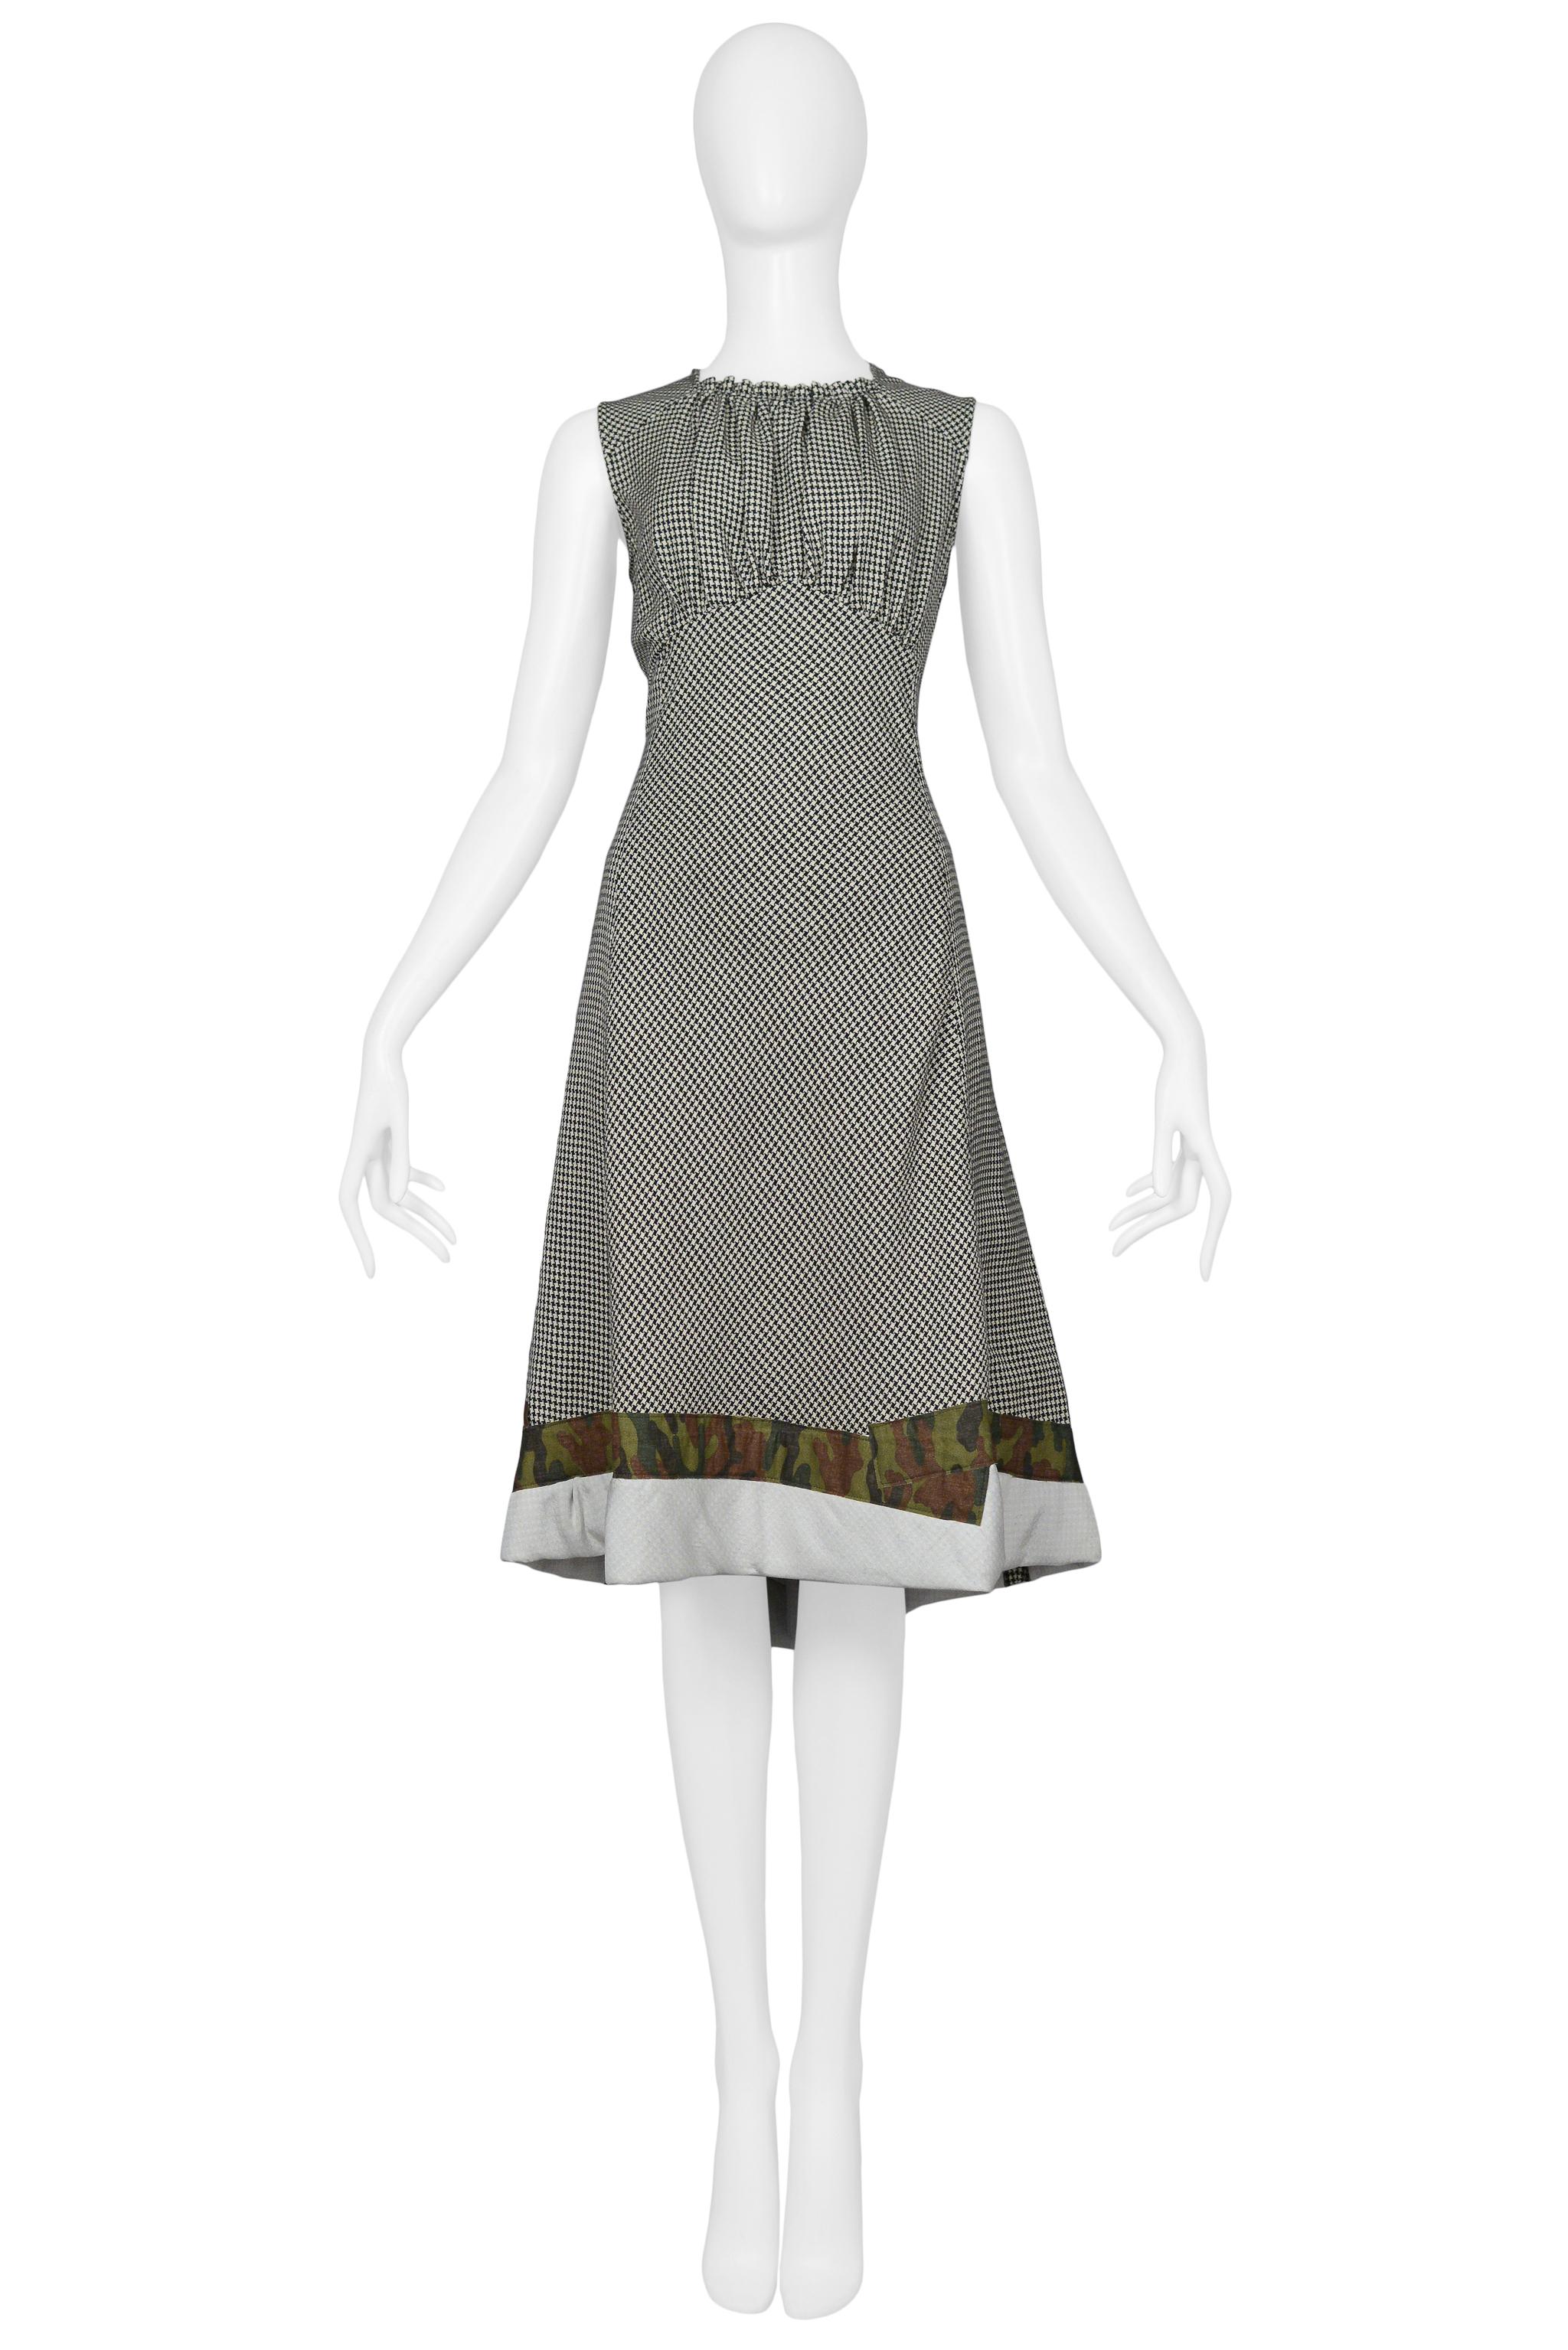 Resurrection Vintage is excited to offer a vintage Comme des Garcons black and white herringbone dress with camouflage trim at the hem, gathered bodice, and empire bustline. From the SS 2001 collection.

Comme Des Garcons
Size: Small
Measurements: